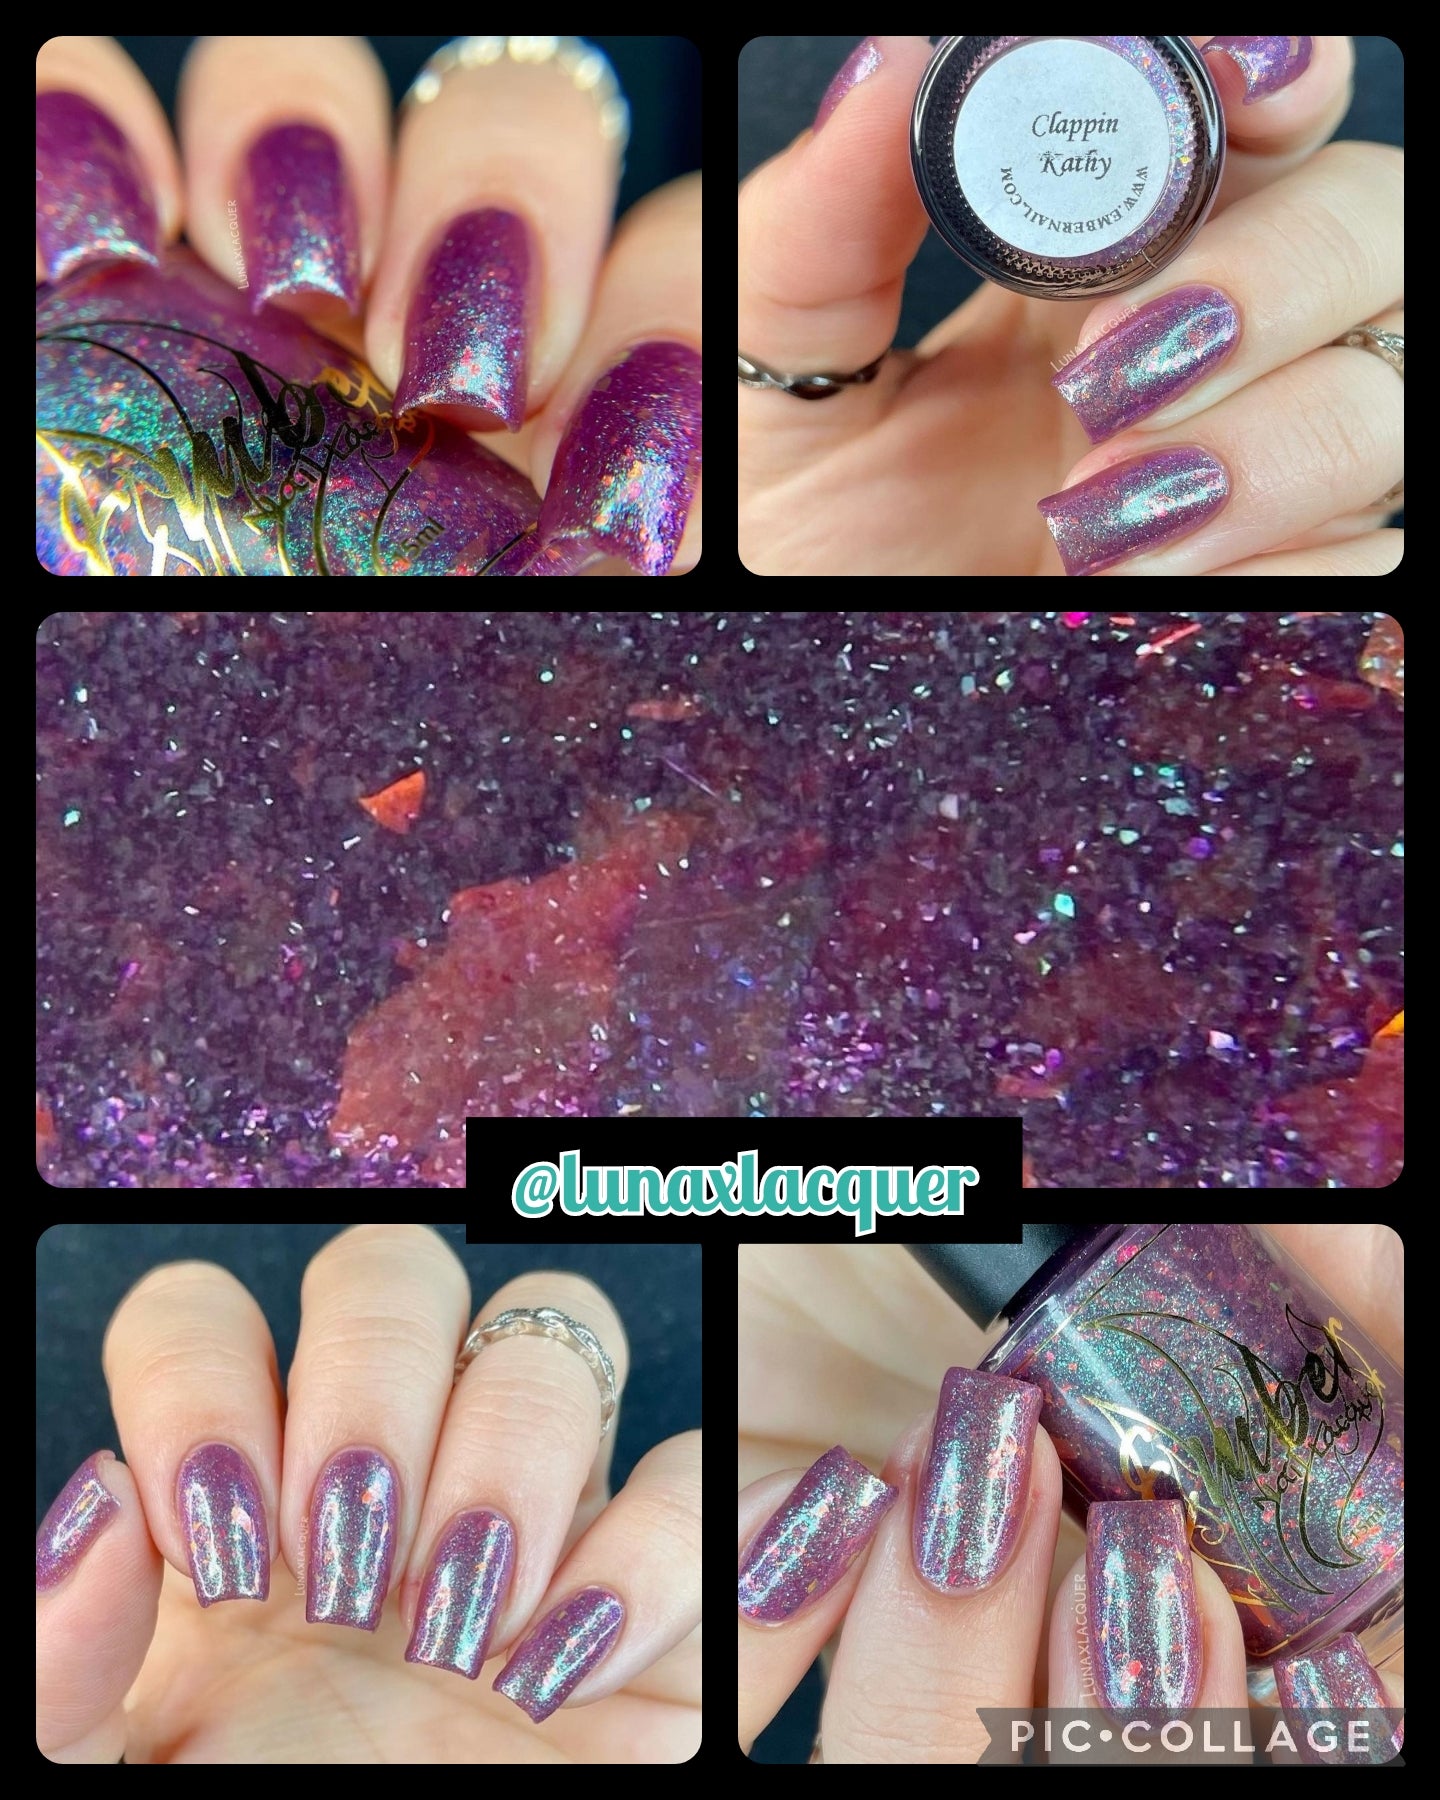 collage Clappin' Kathy center image deep dive showing purple base loaded with holographic glitter - top left deep shade almost burgundy - top right applied with bottle label - bottom right lighter shade of purple with product bottle - bottom left beautiful shade of purple nails with green shimmer